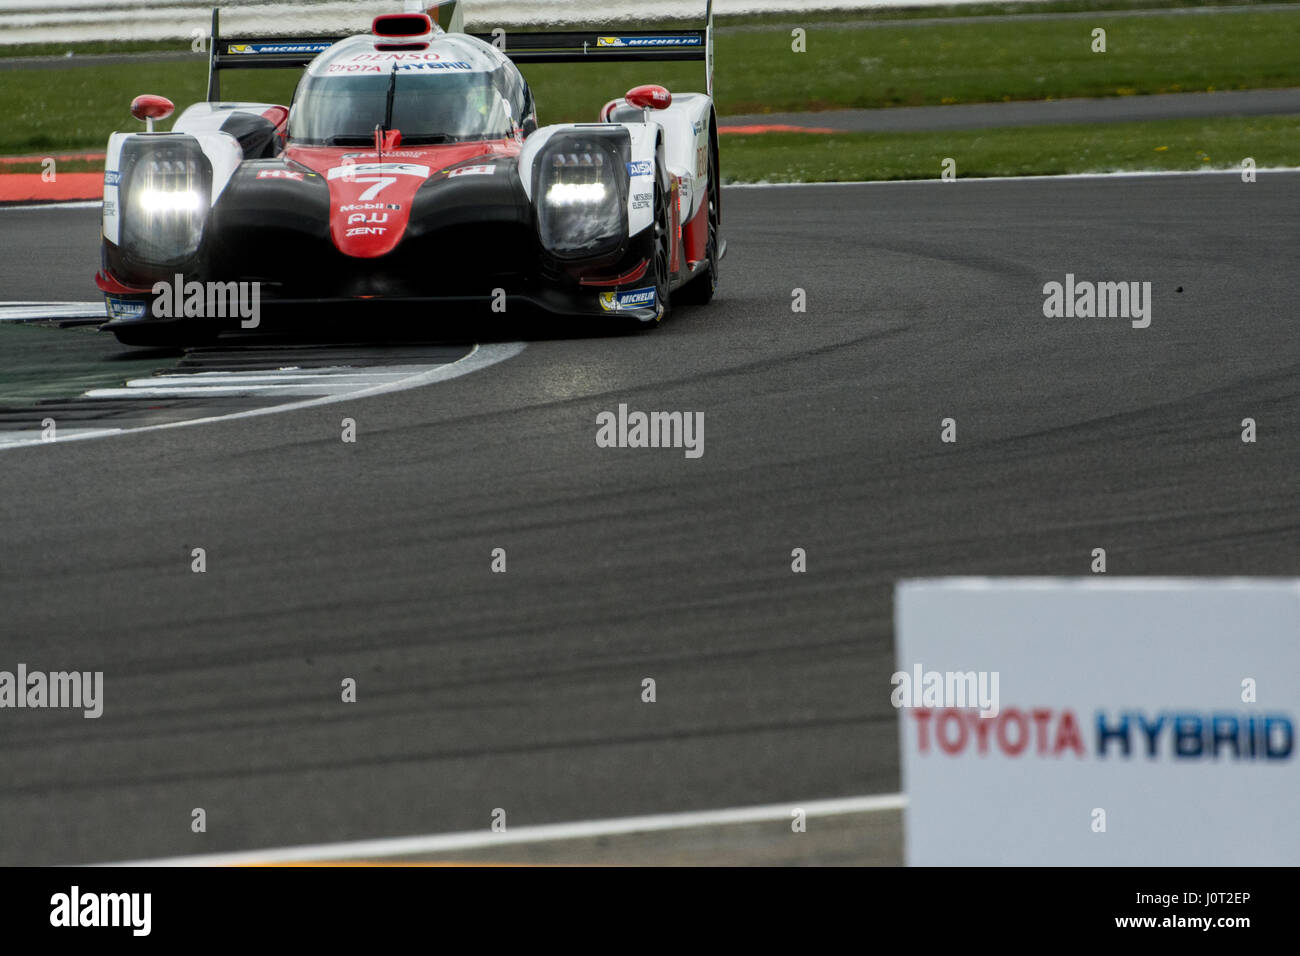 Towcester, Northamptonshire, UK. 16th April, 2017. FIA WEC racing team Toyota Gazoo Racing (Mike Conway / Kamui Kobayashi / Jose Maria Lopez) drives during the 6 Hours of Silverstone of the FIA World Endurance Championship Autograph session at Silverstone Circuit Photo by Gergo Toth / Alamy Live News Stock Photo